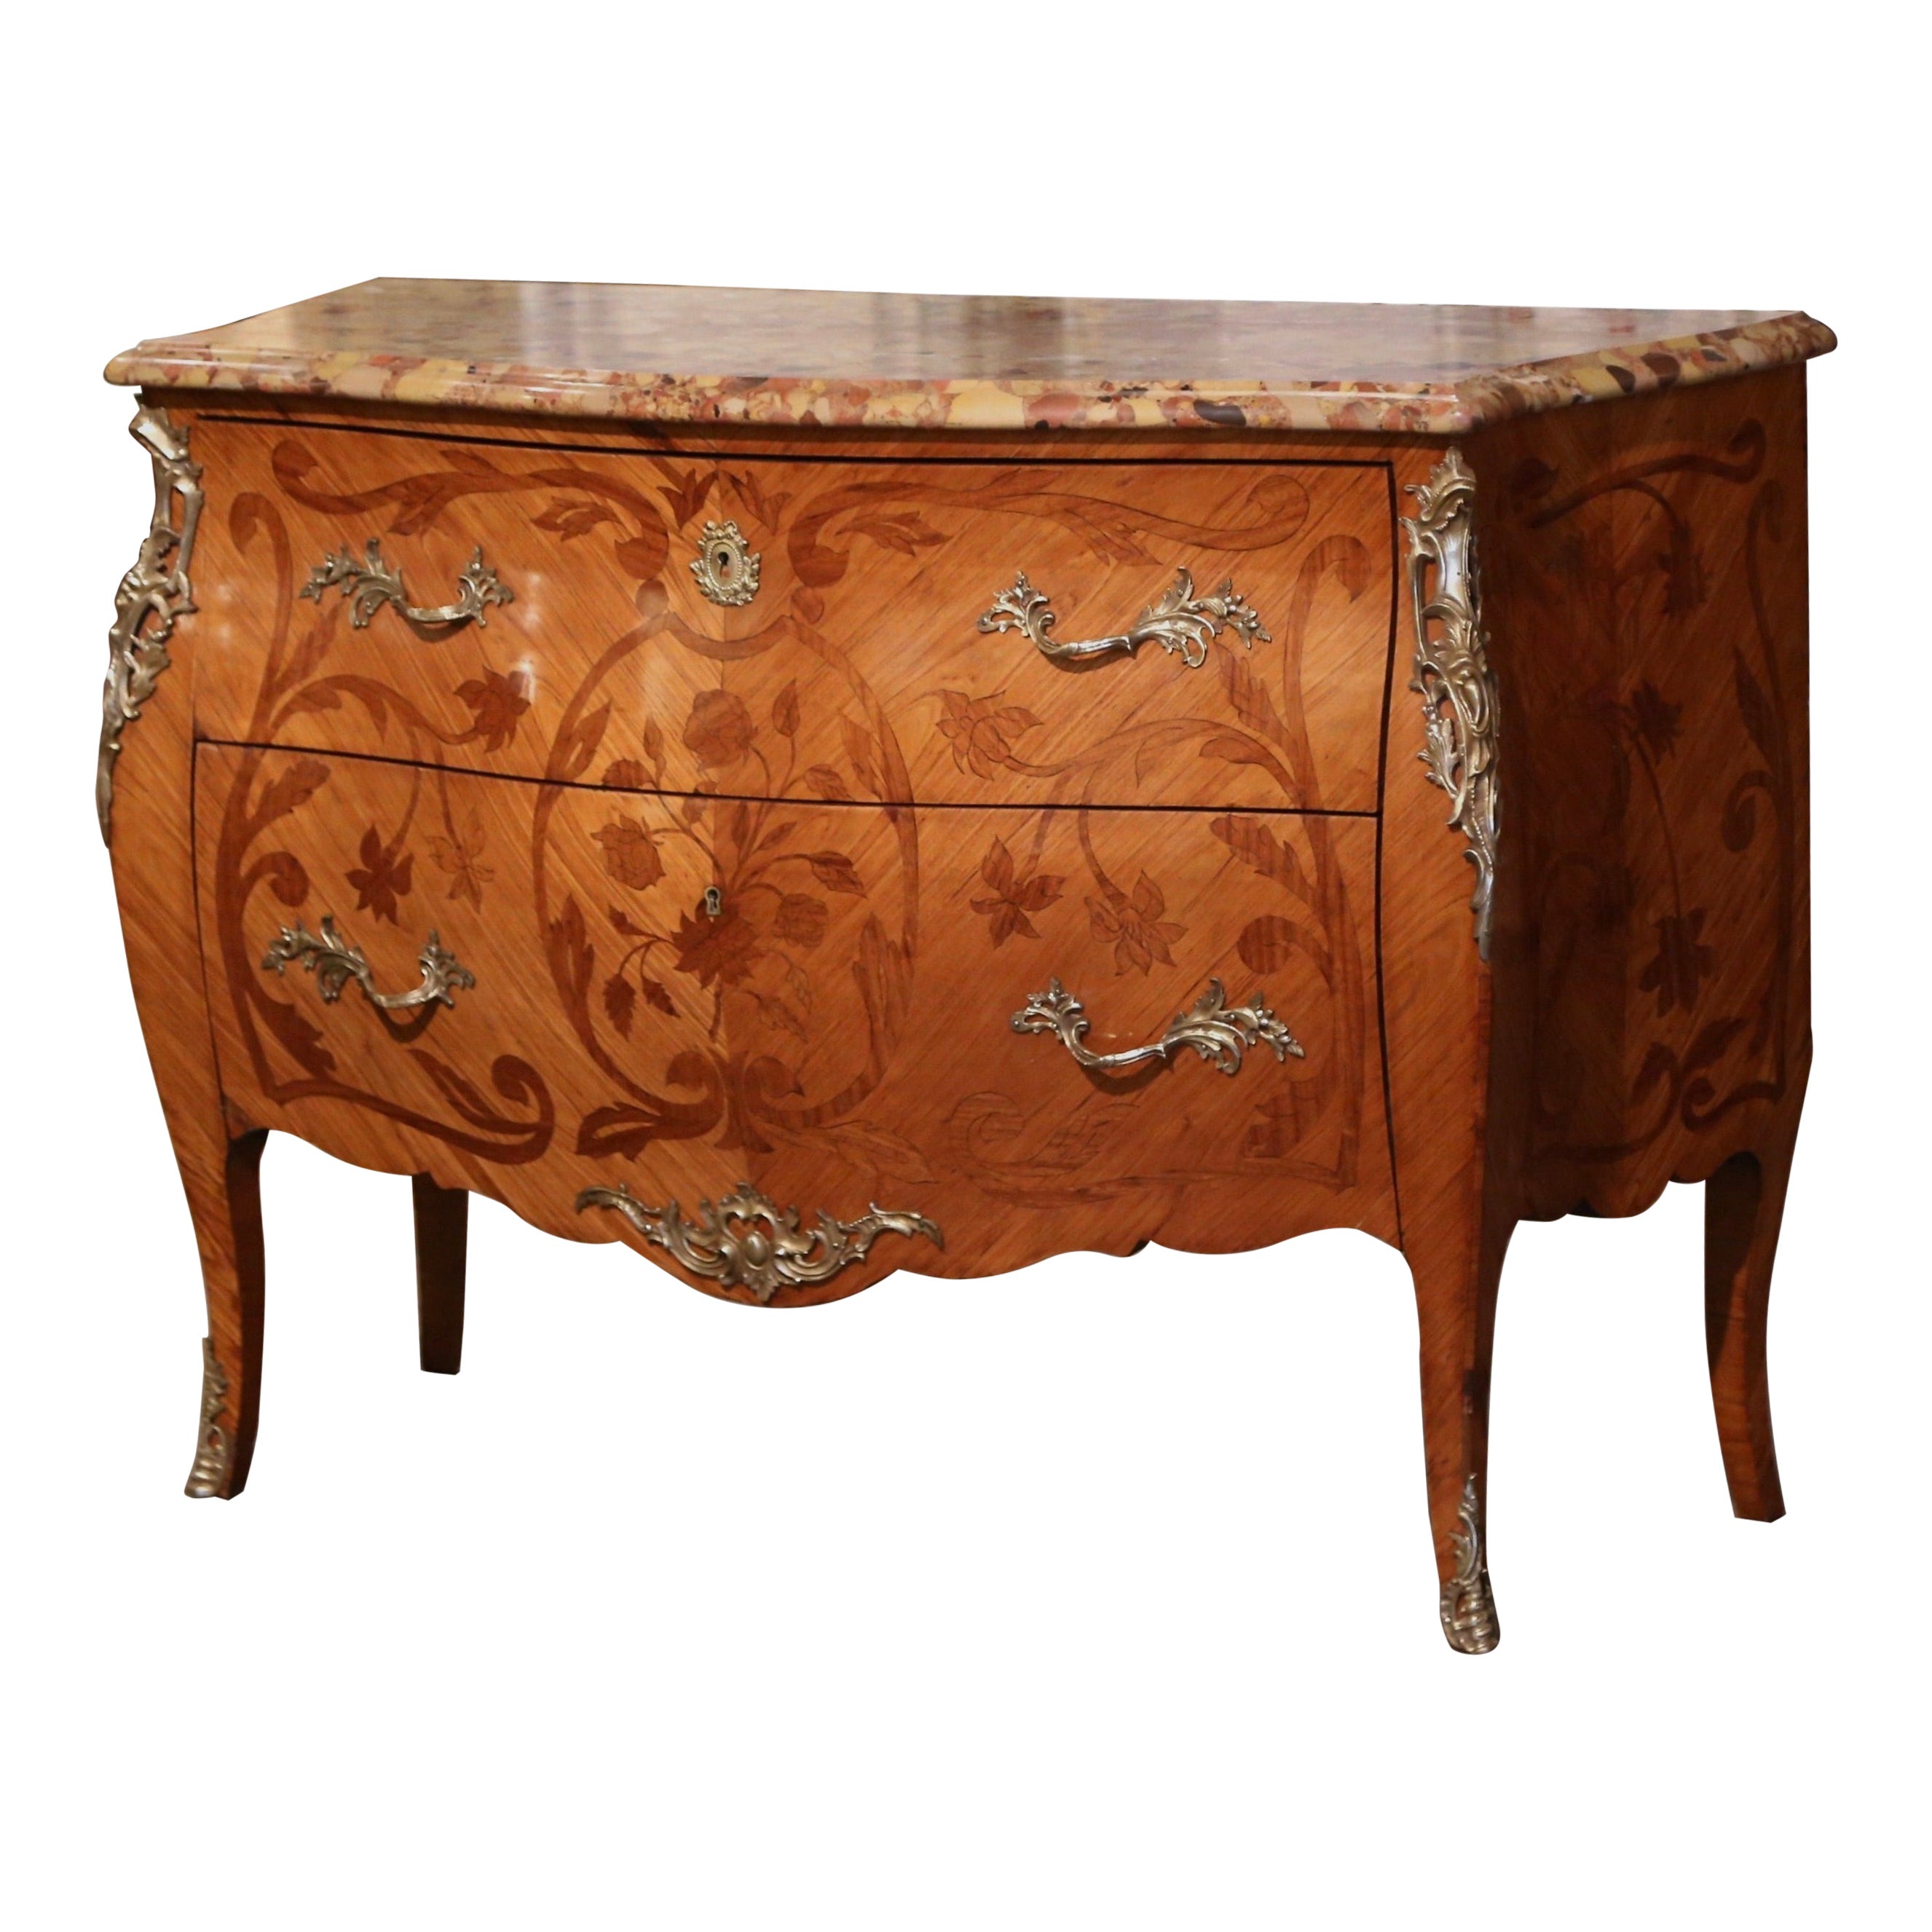 Late 19th Century Louis XV Marble Top Marquetry & Ormolu Bombe Chest of Drawers